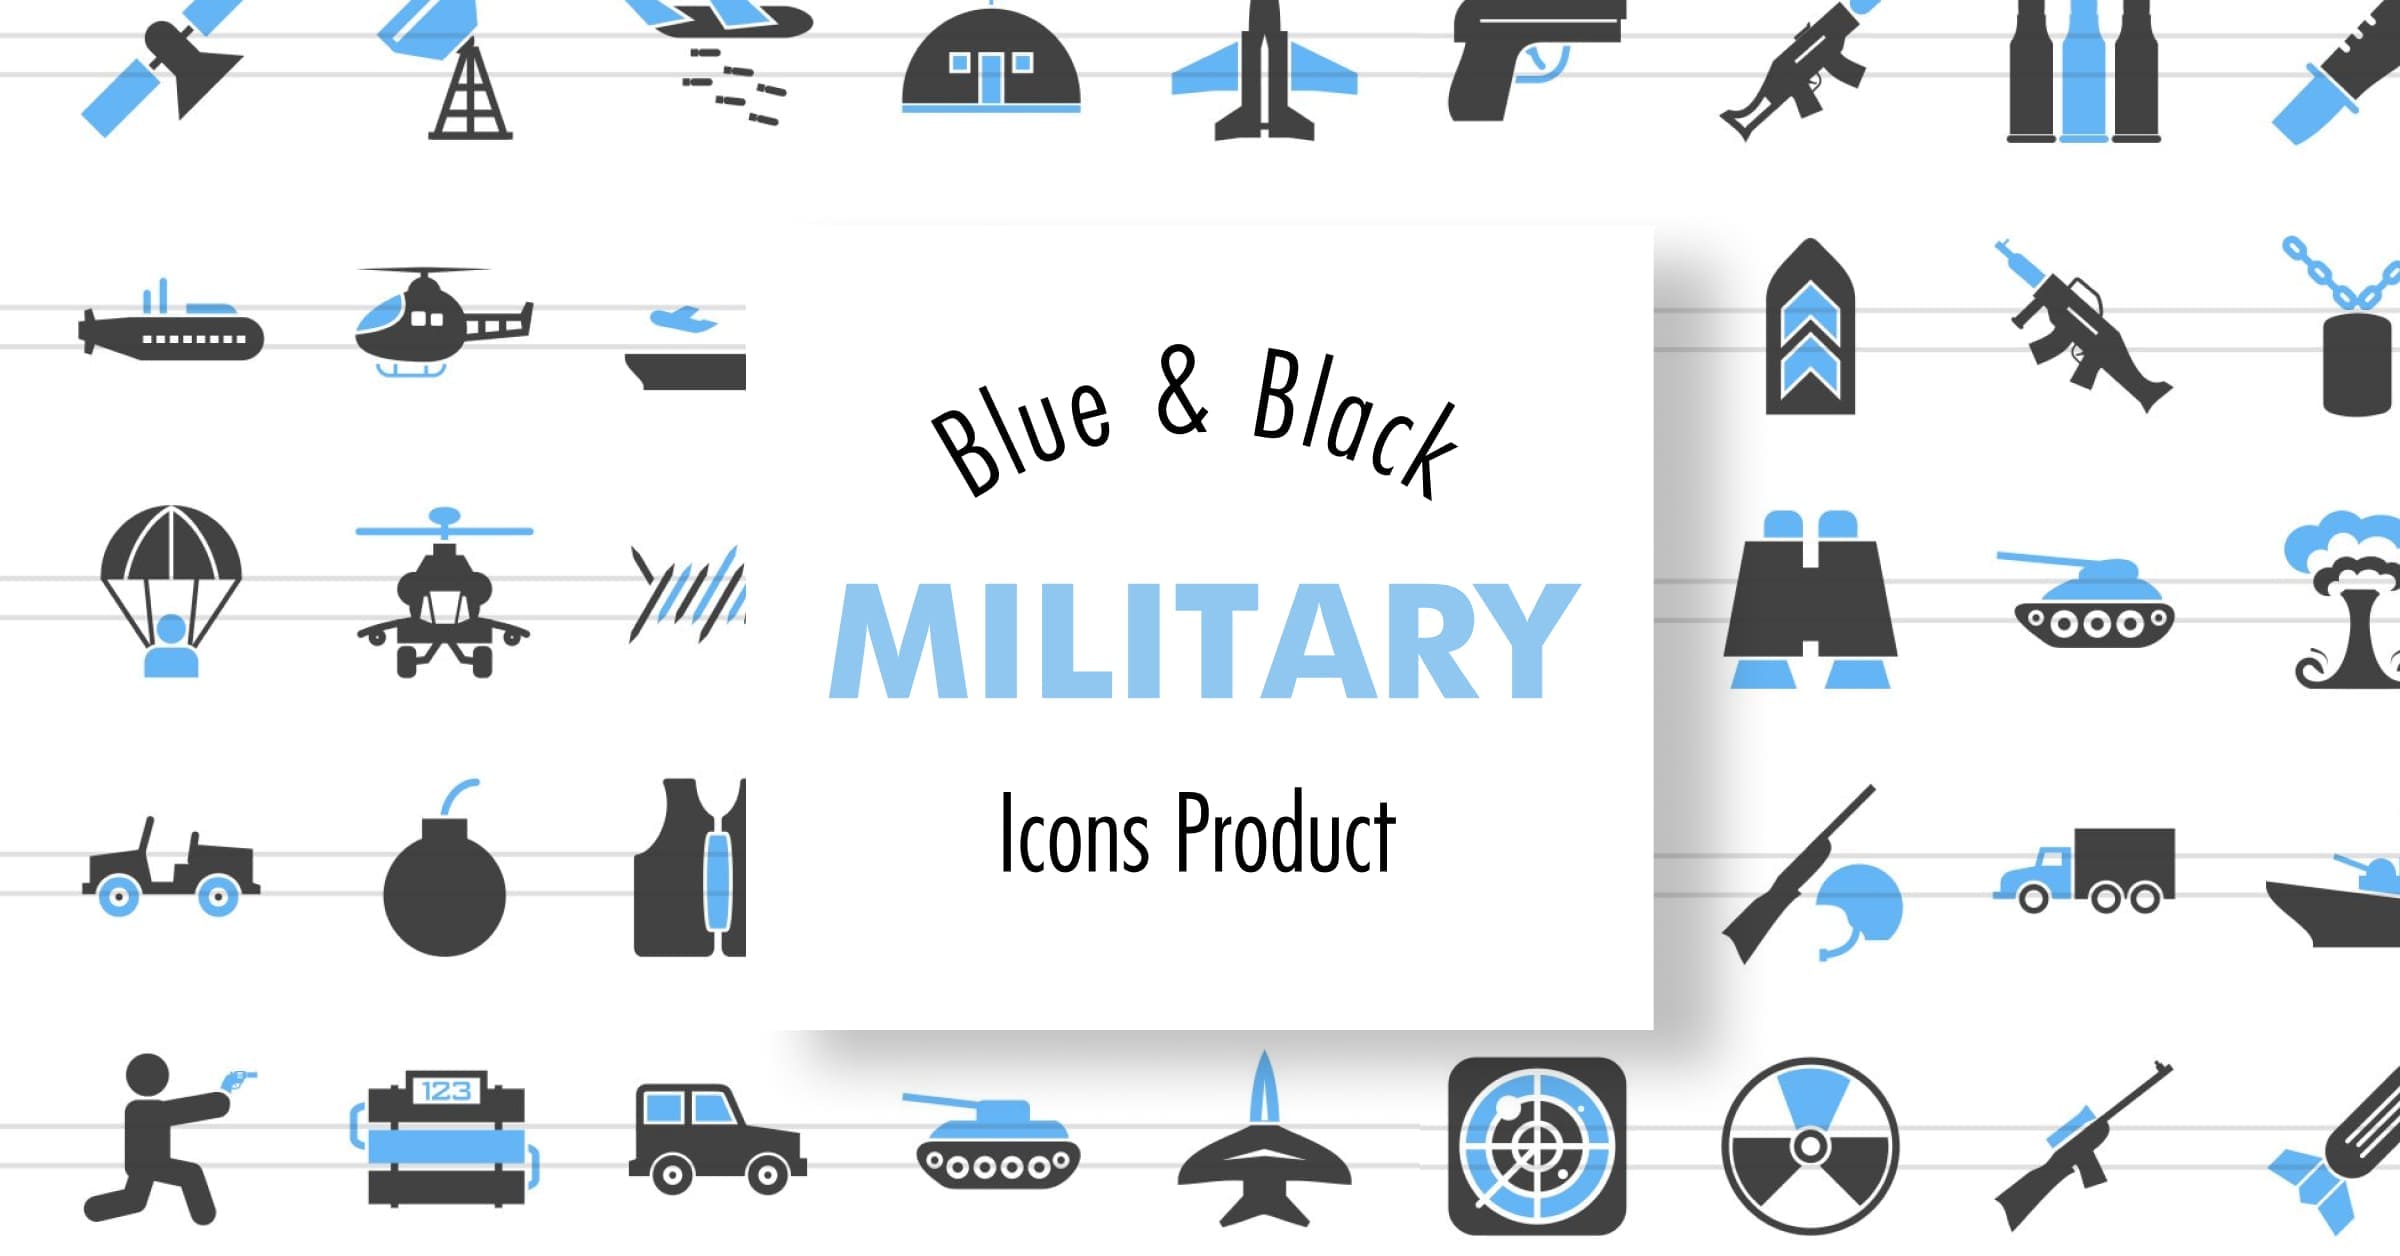 Airplanes with blue wings, a black man with a blue gun and other icons.